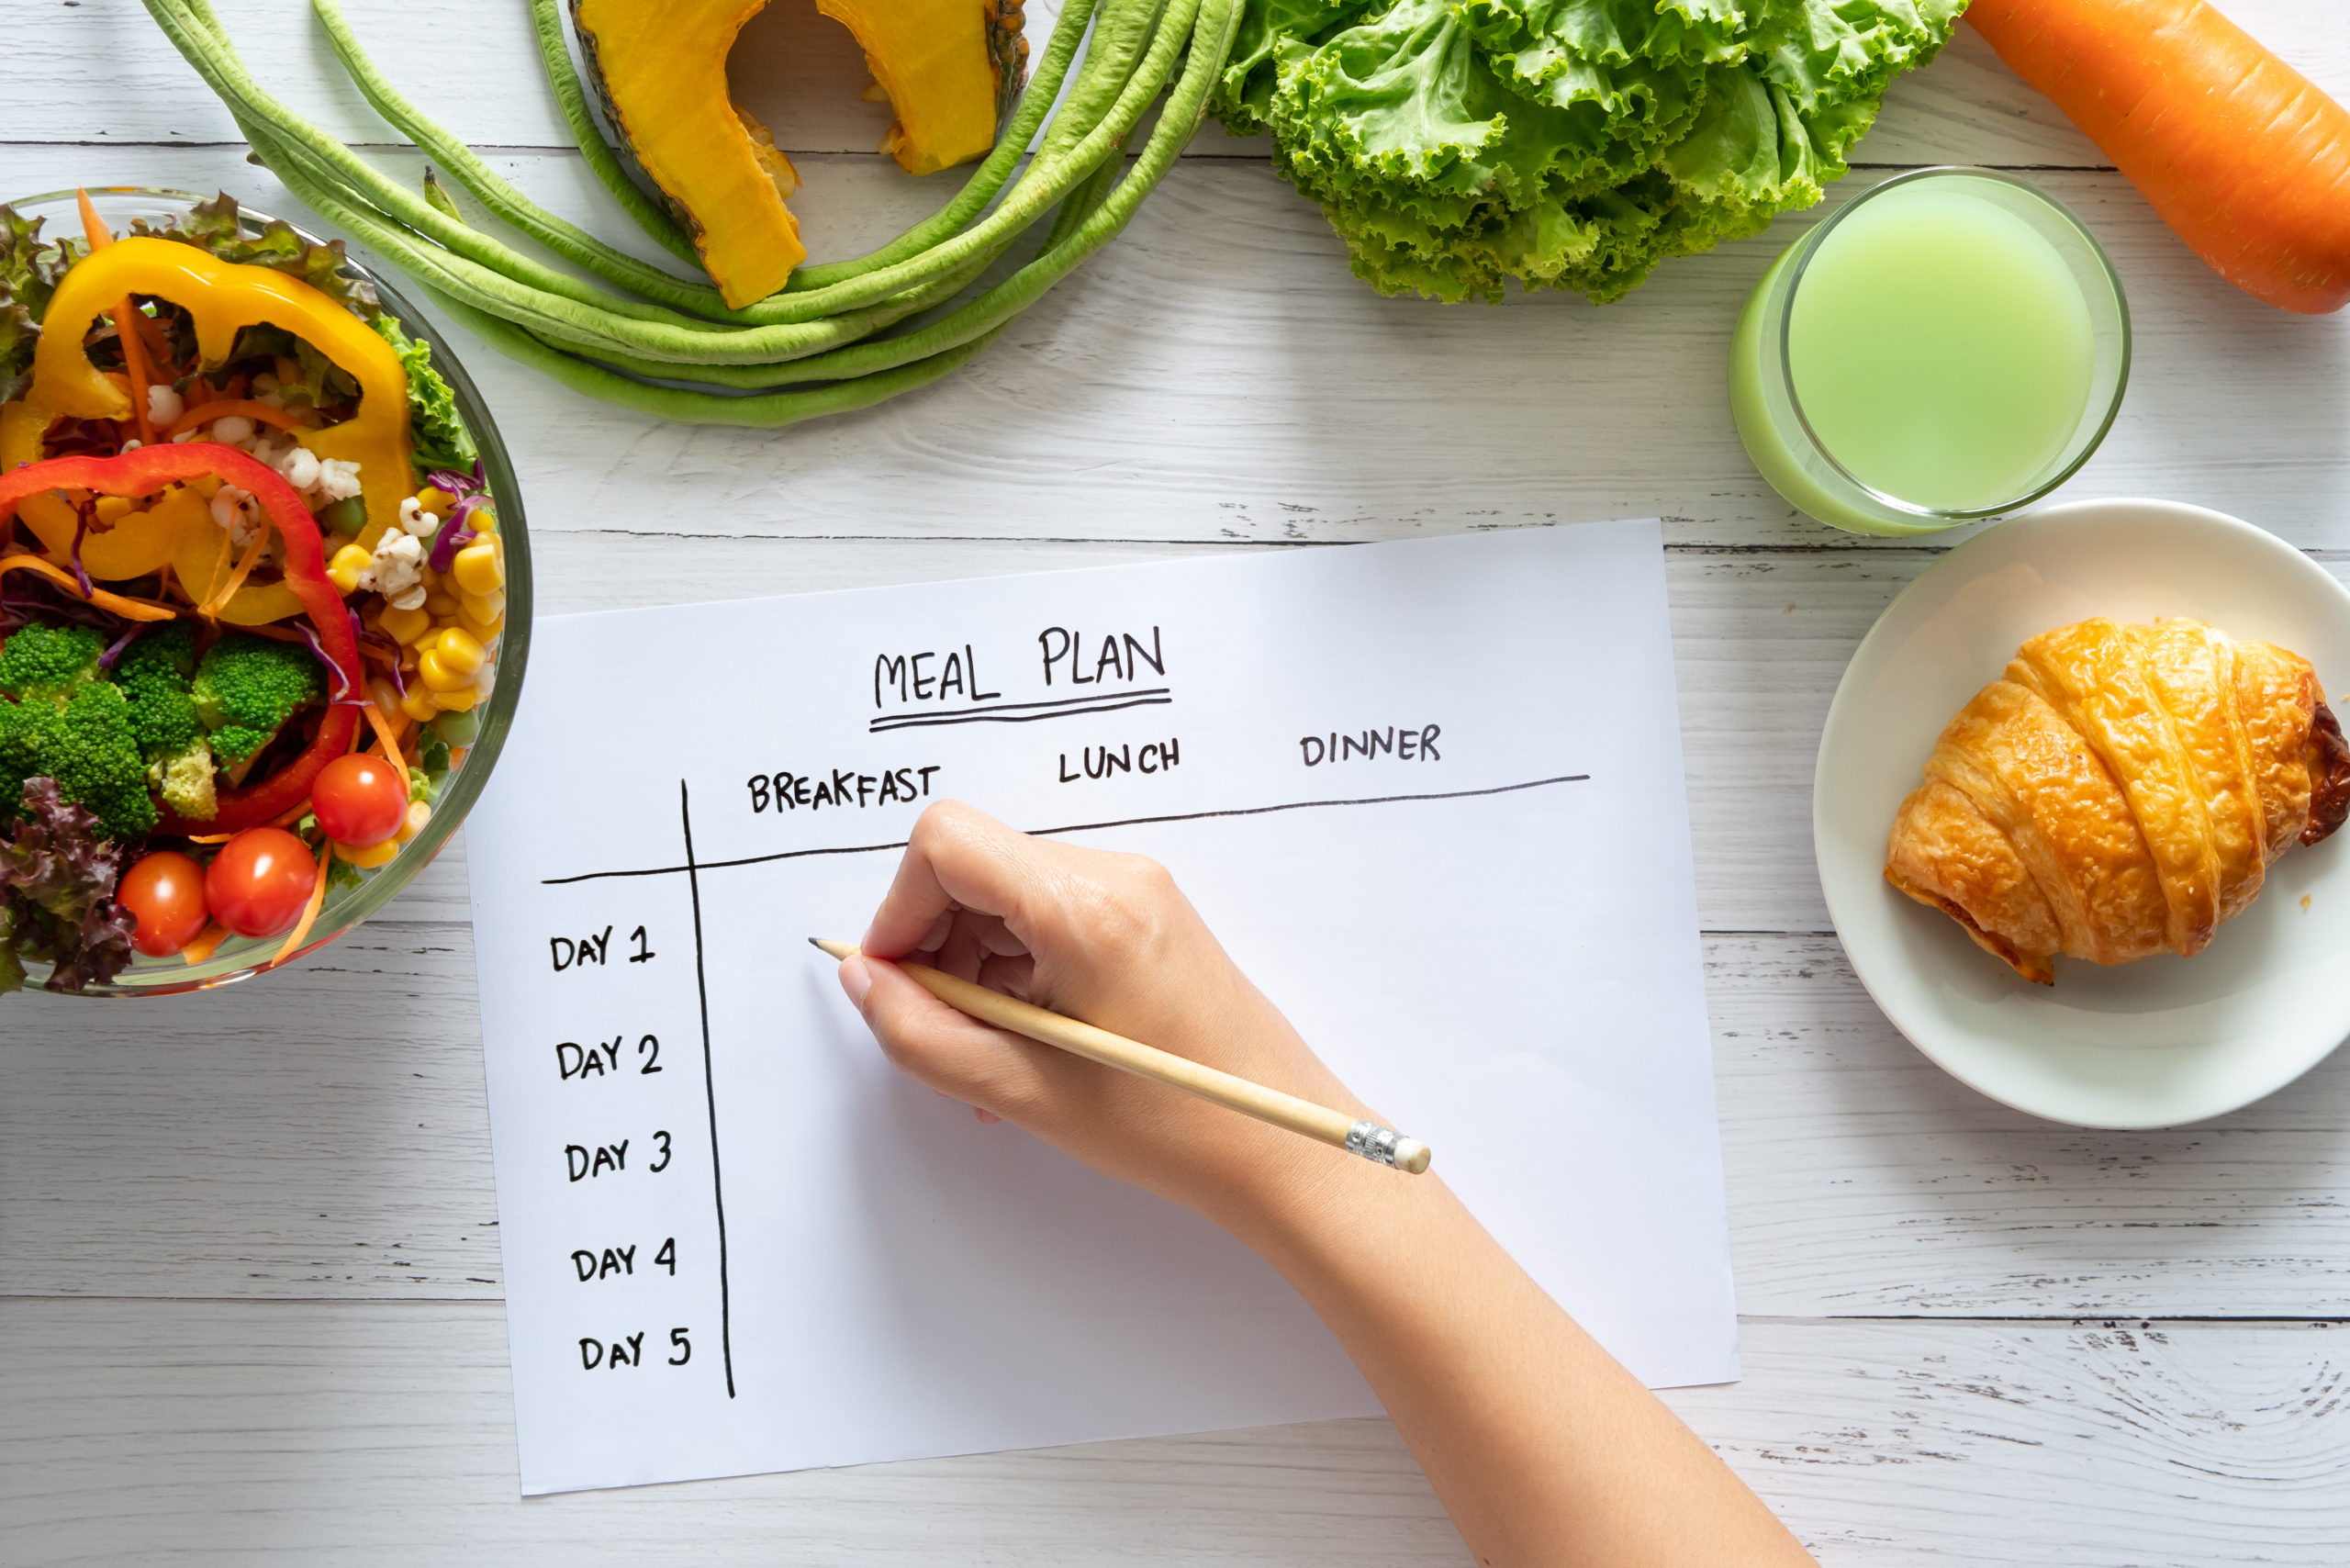 Having a weekly meal plan can help reduce food waste.